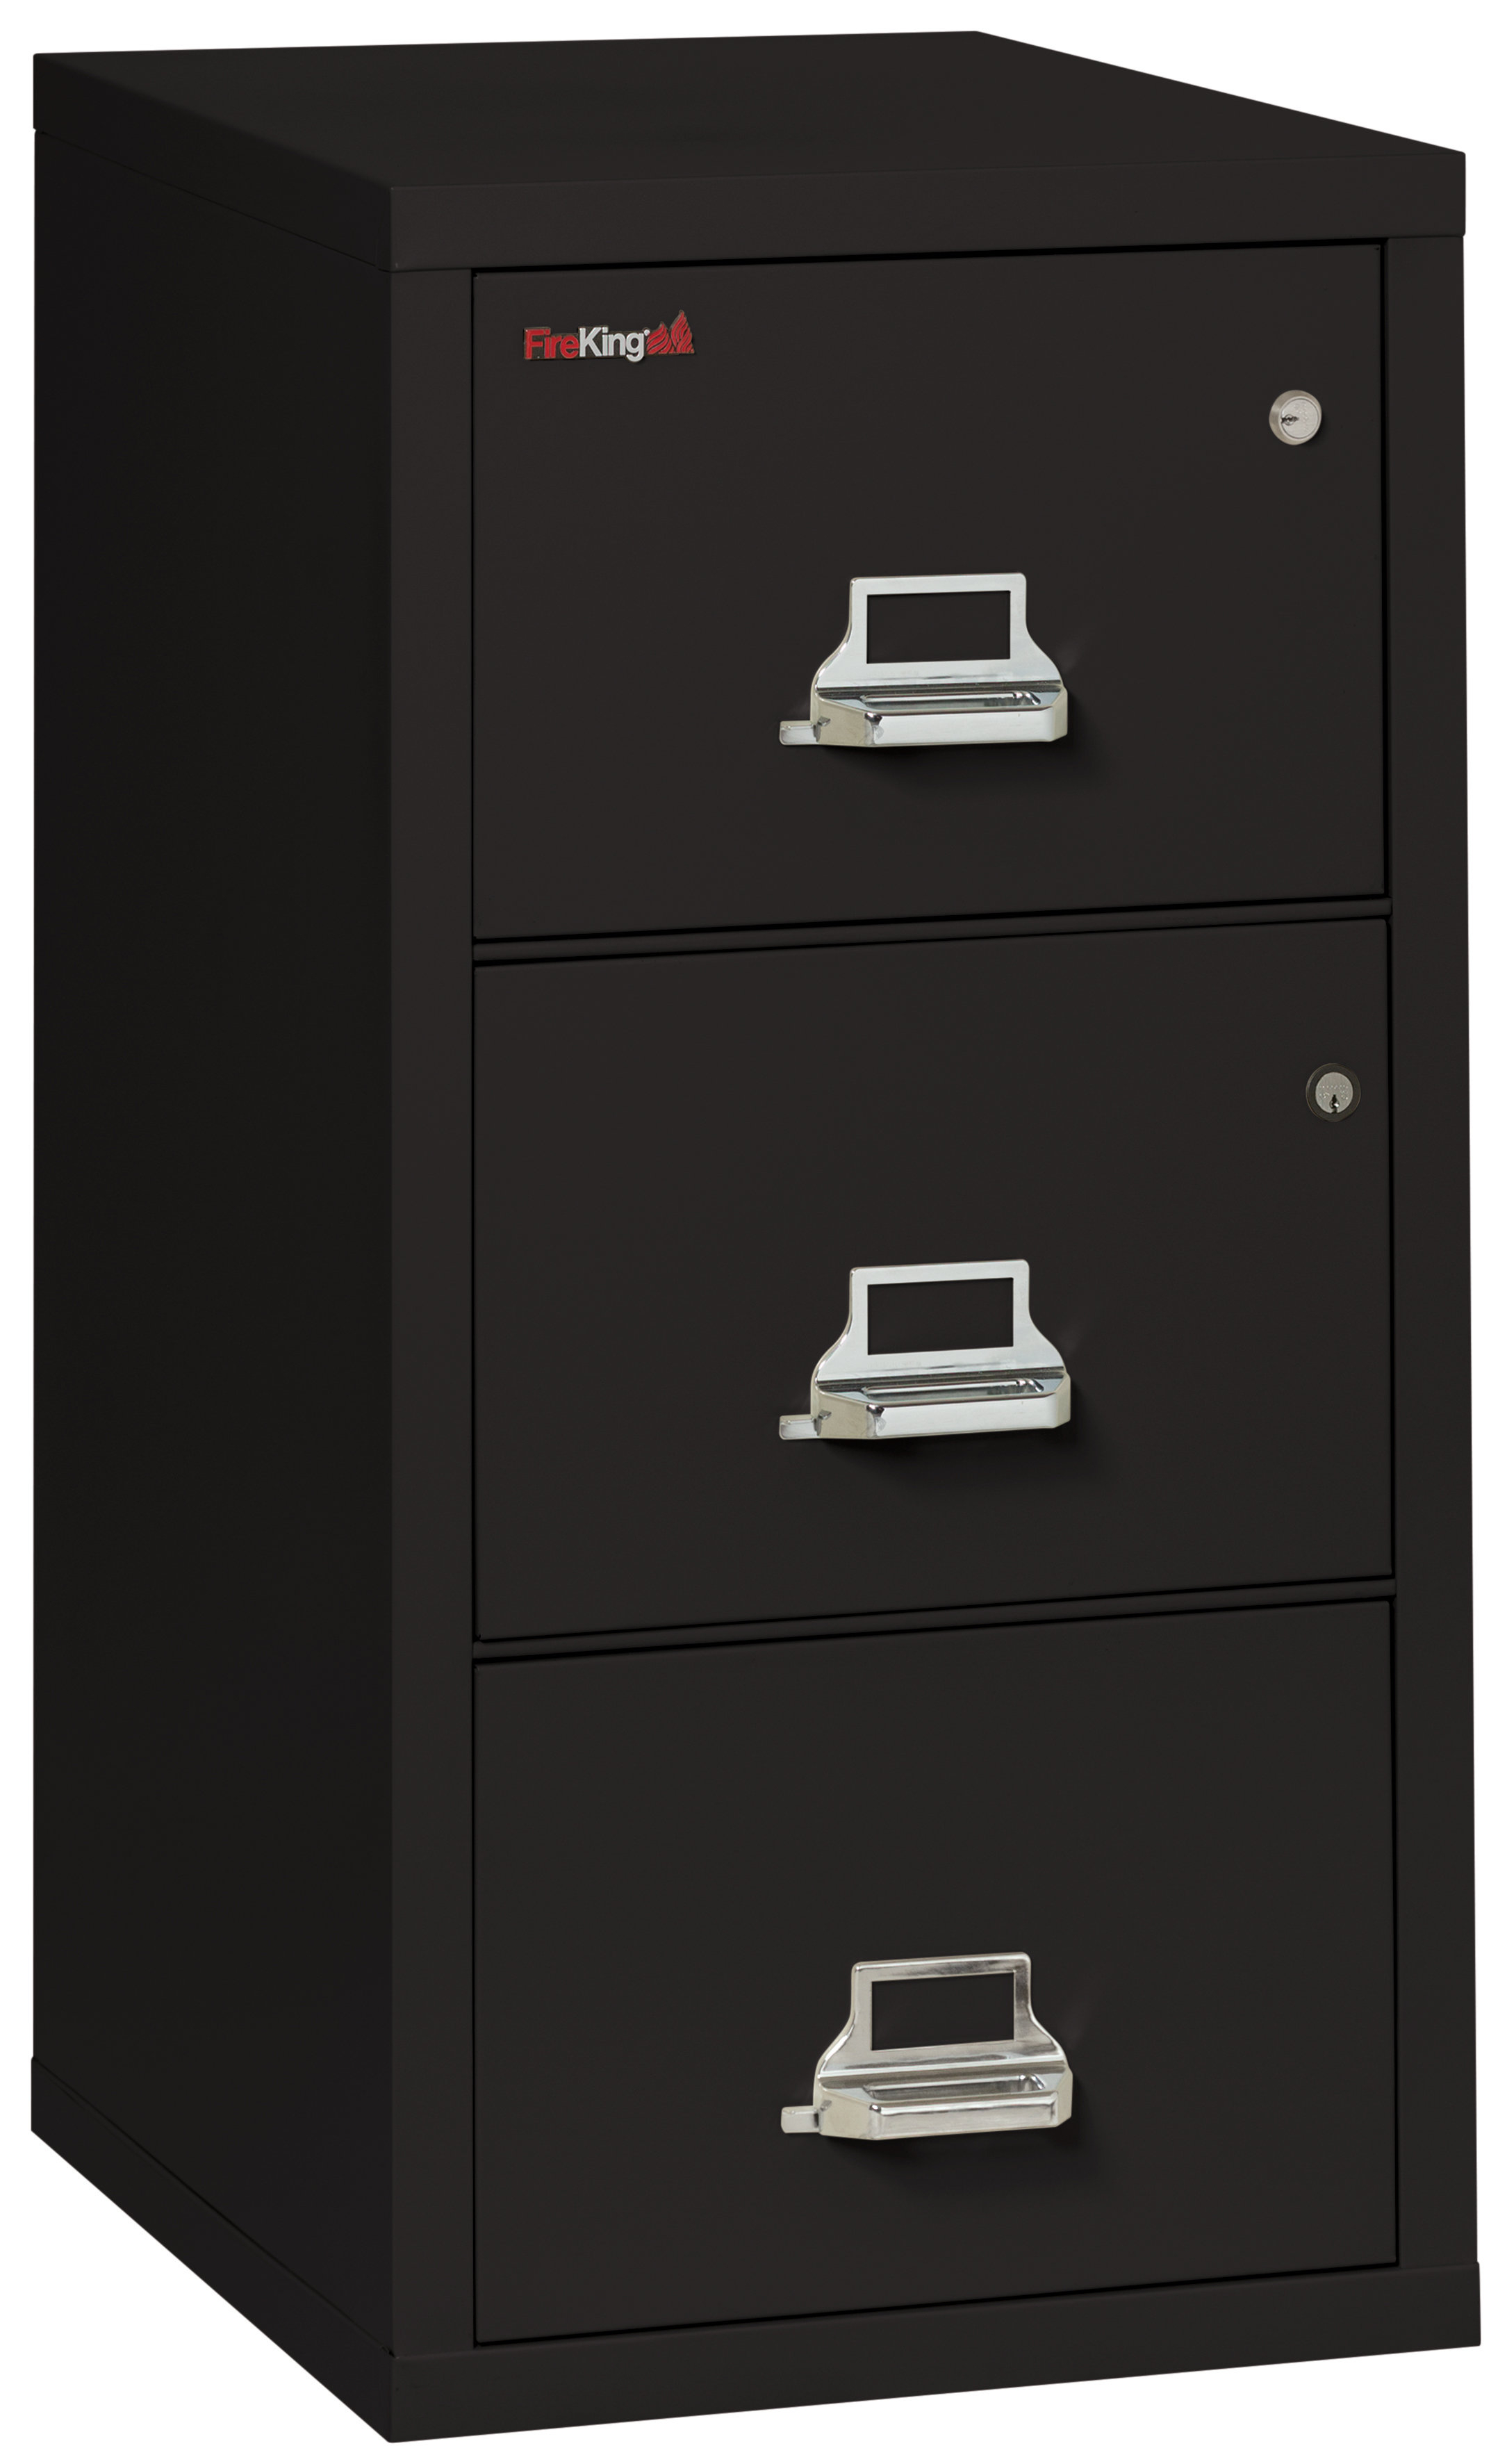 Fireking Legal Safe In A File Fireproof 3 Drawer Vertical File inside proportions 2169 X 3546